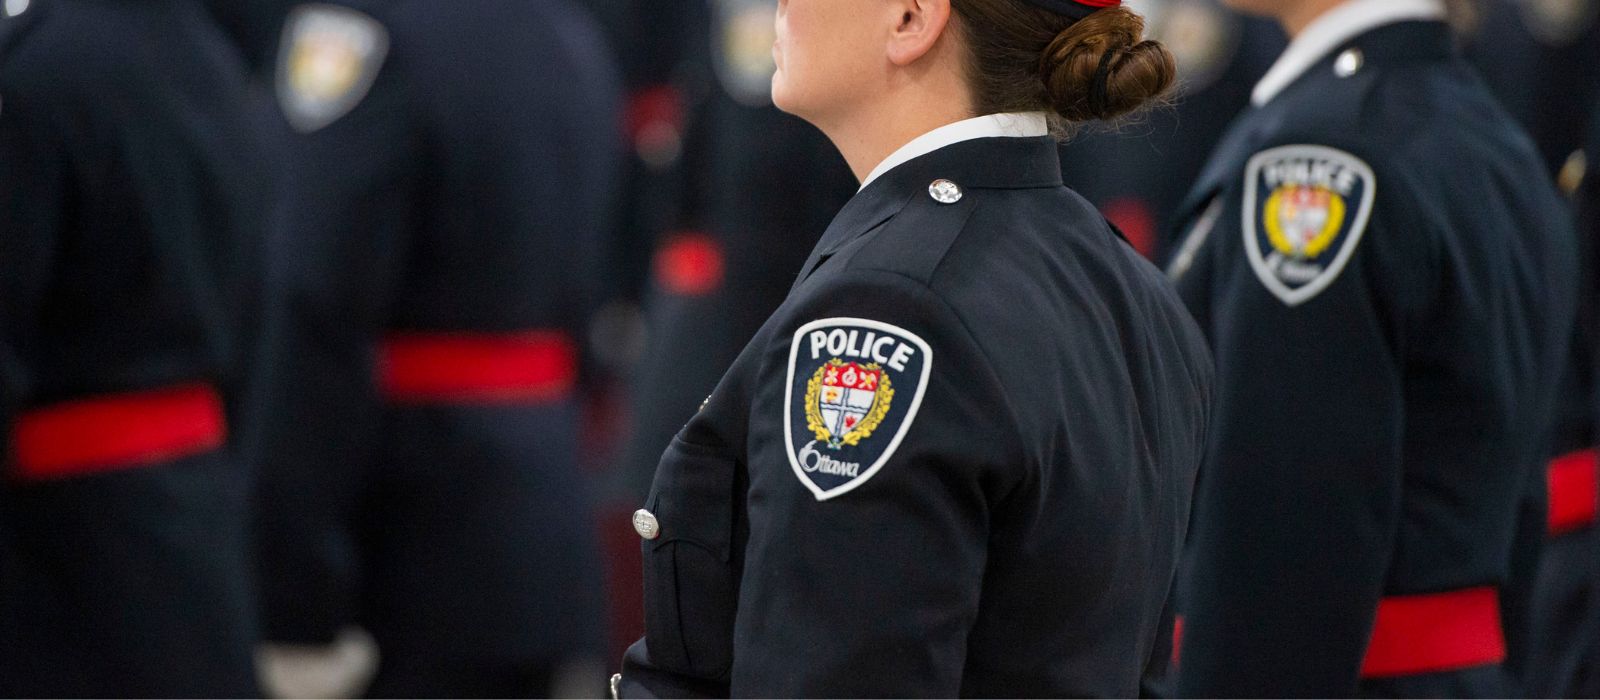 Member of the Ottawa Police Service stands at attention in their formal uniform.